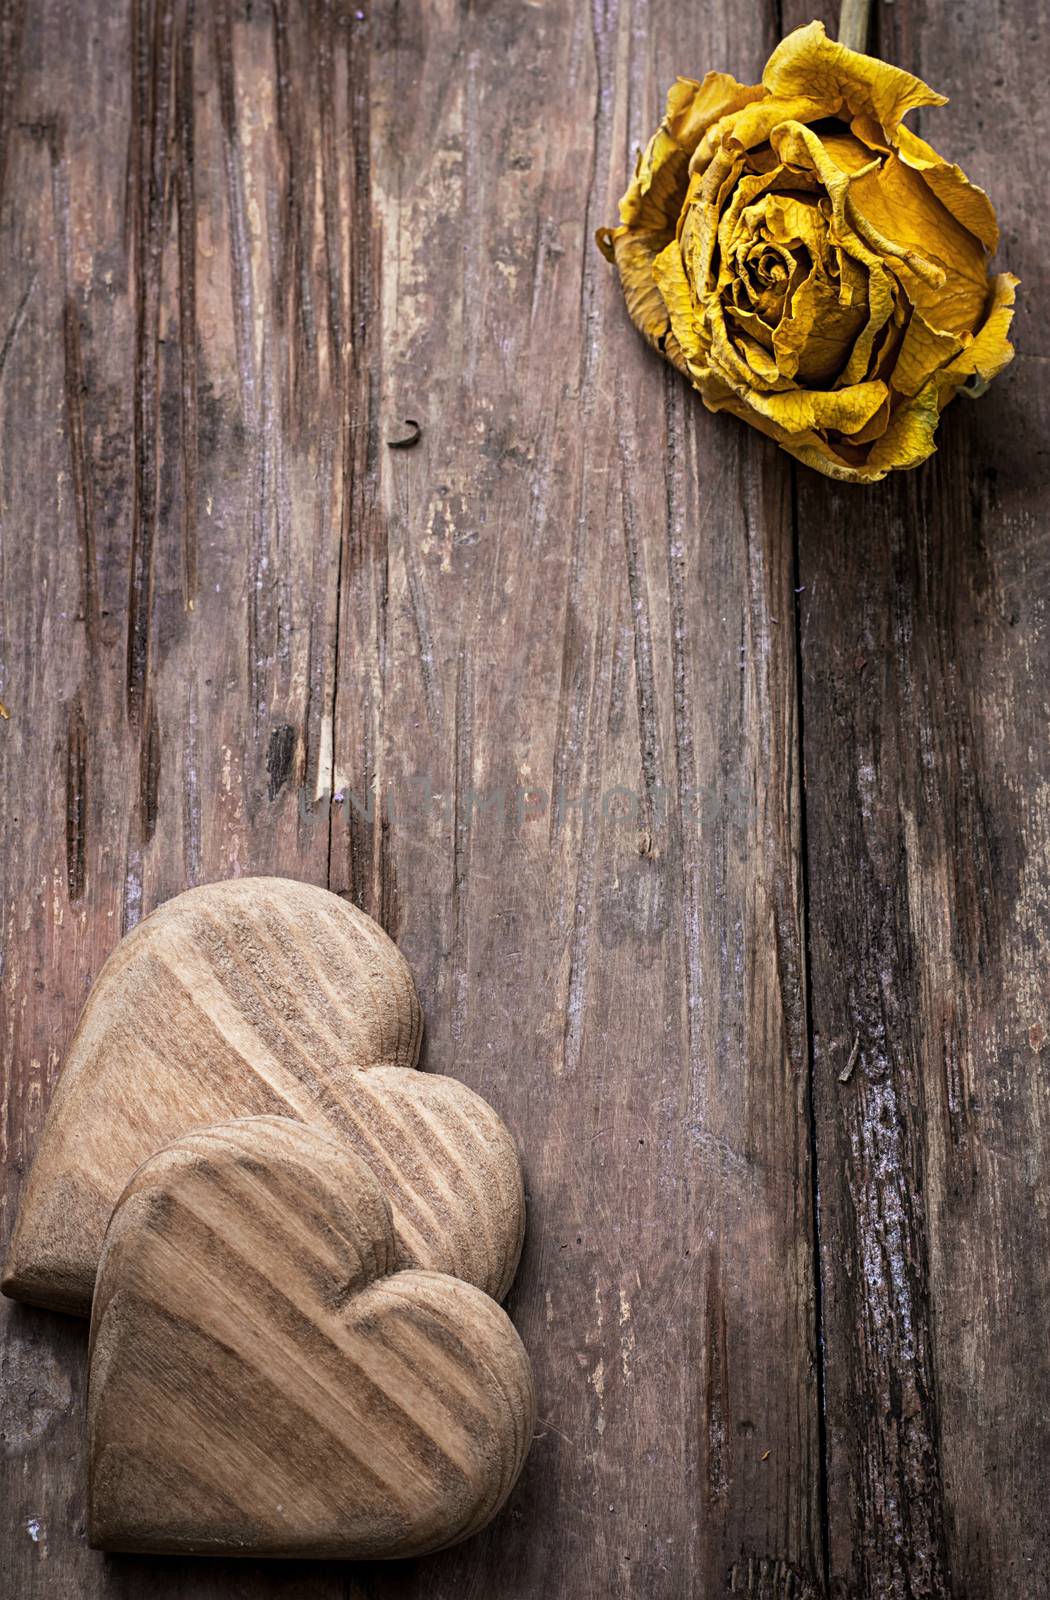 hand-carved symbolic wooden heart on a background of yellow roses